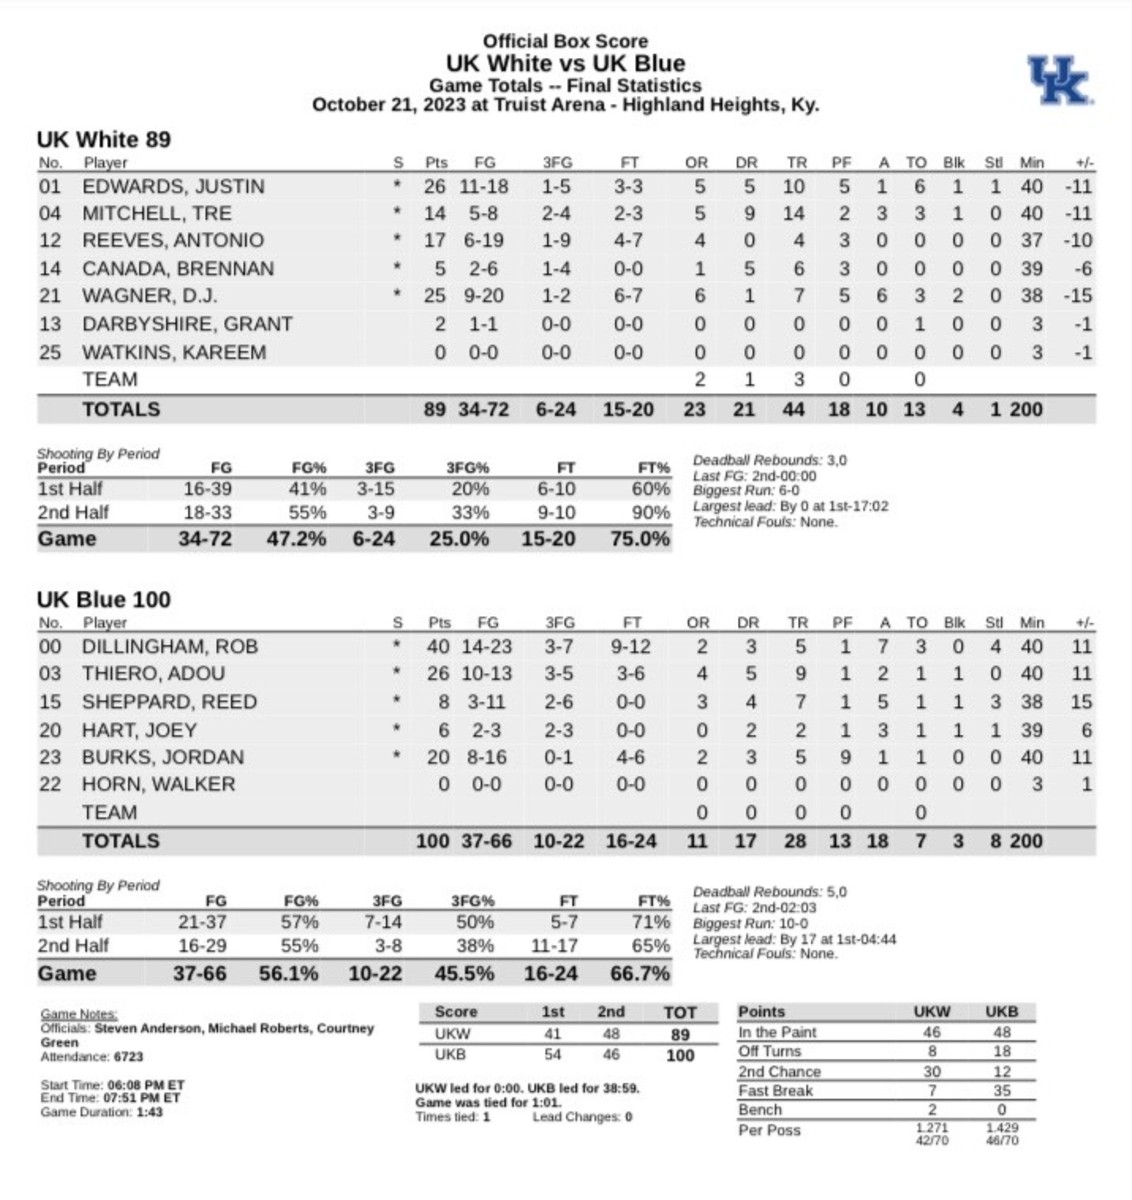 Taking a look at the box score from the Kentucky basketball BlueWhite